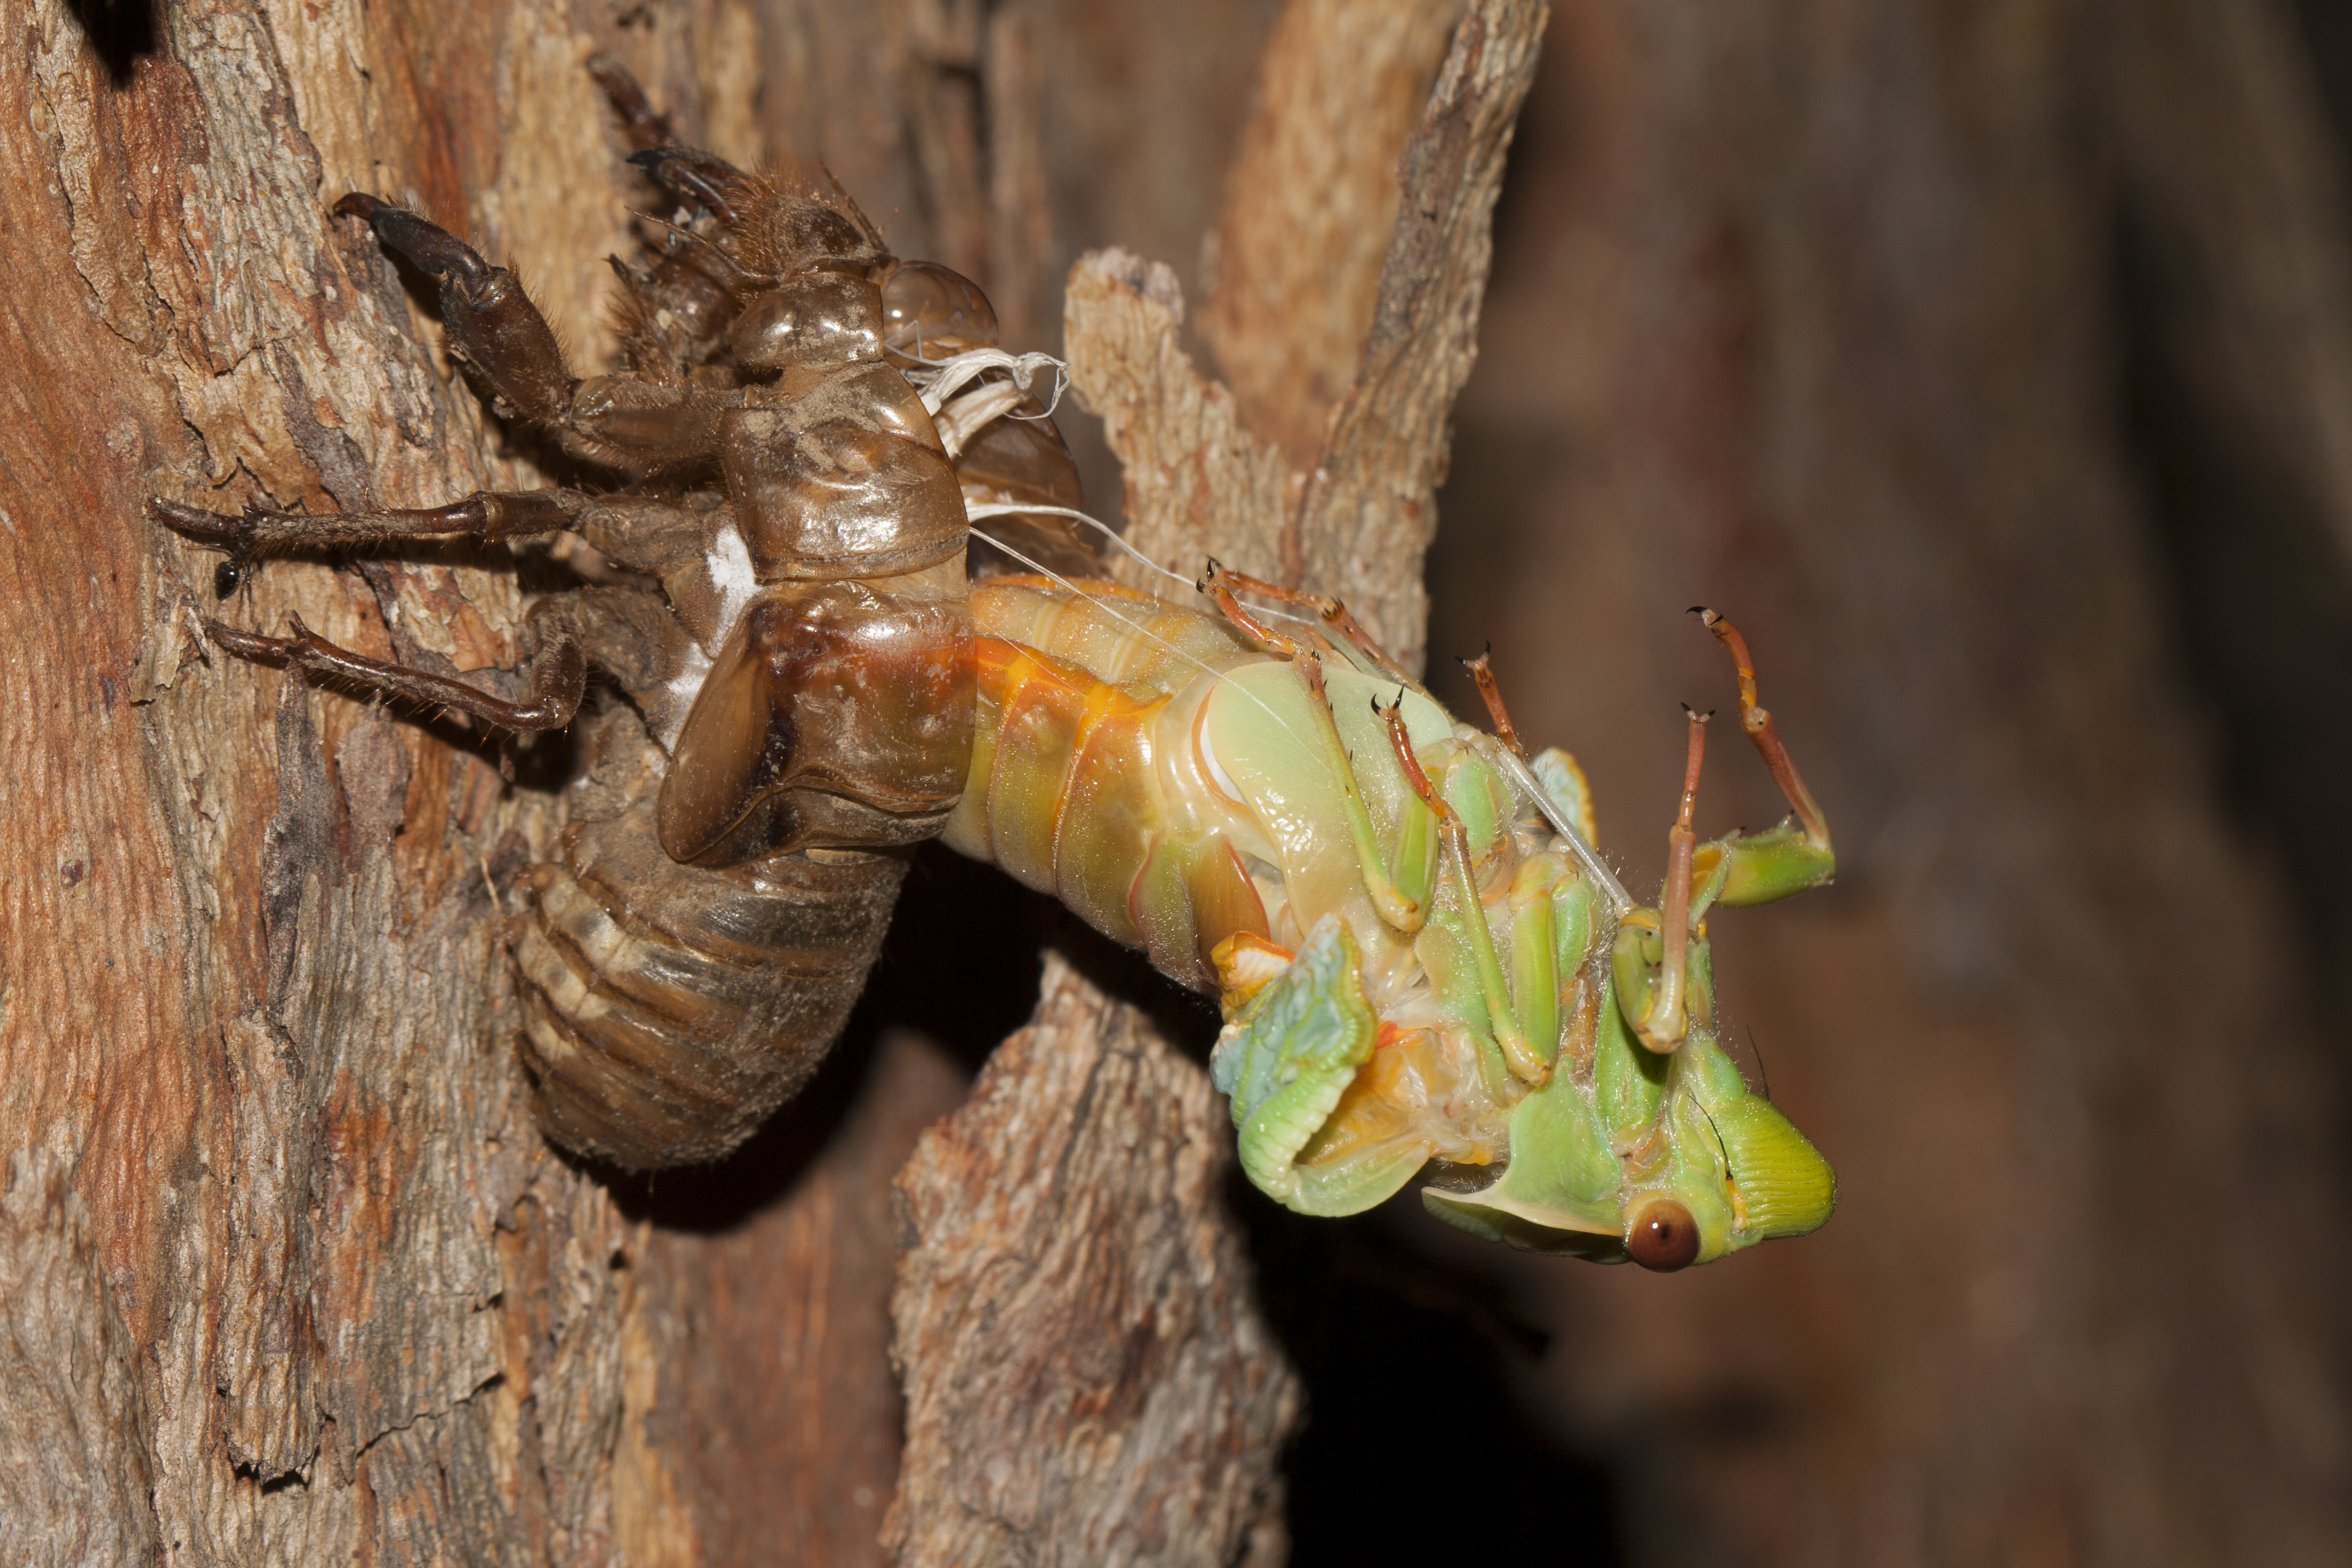 File:Green grocer cicada molting.jpg - Wikimedia Commons